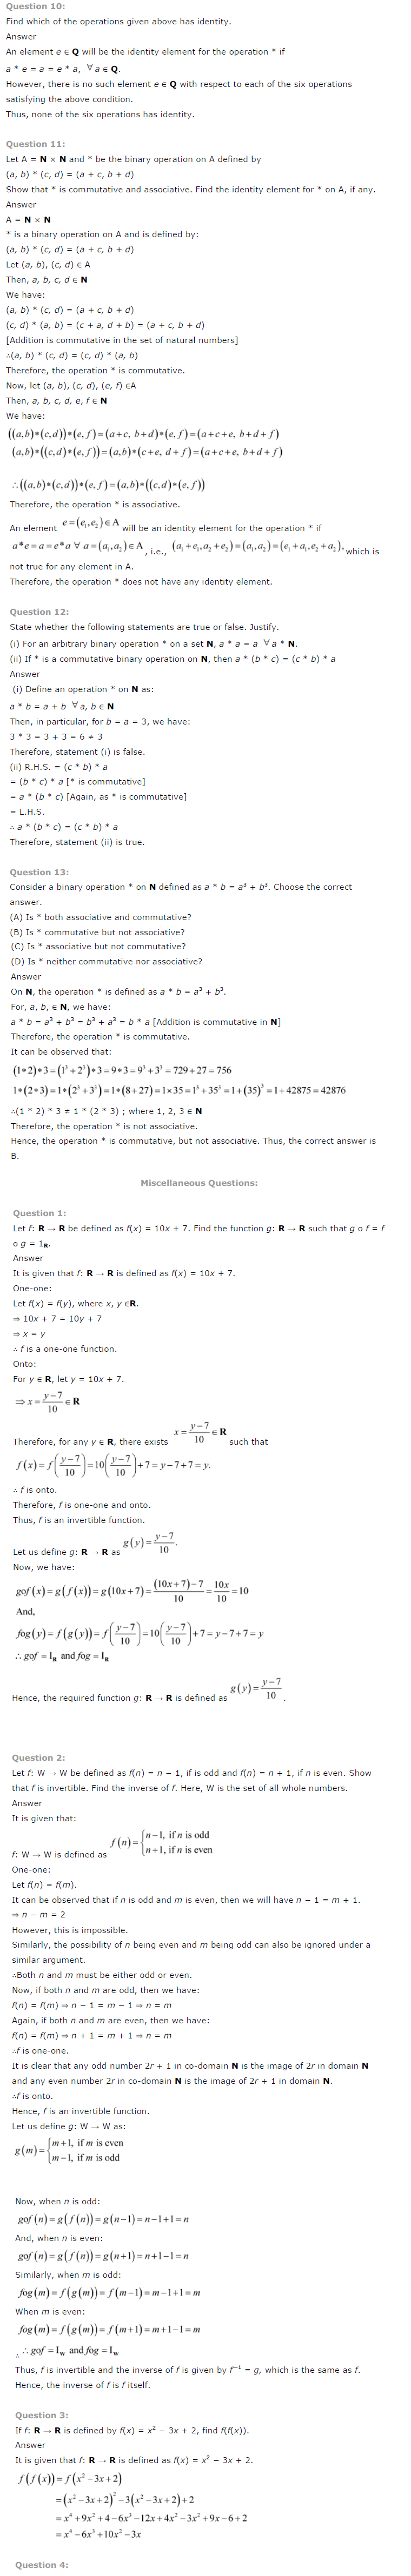 NCERT Solutions For Class 12 Maths Chapter 1 Relations and Functions 10